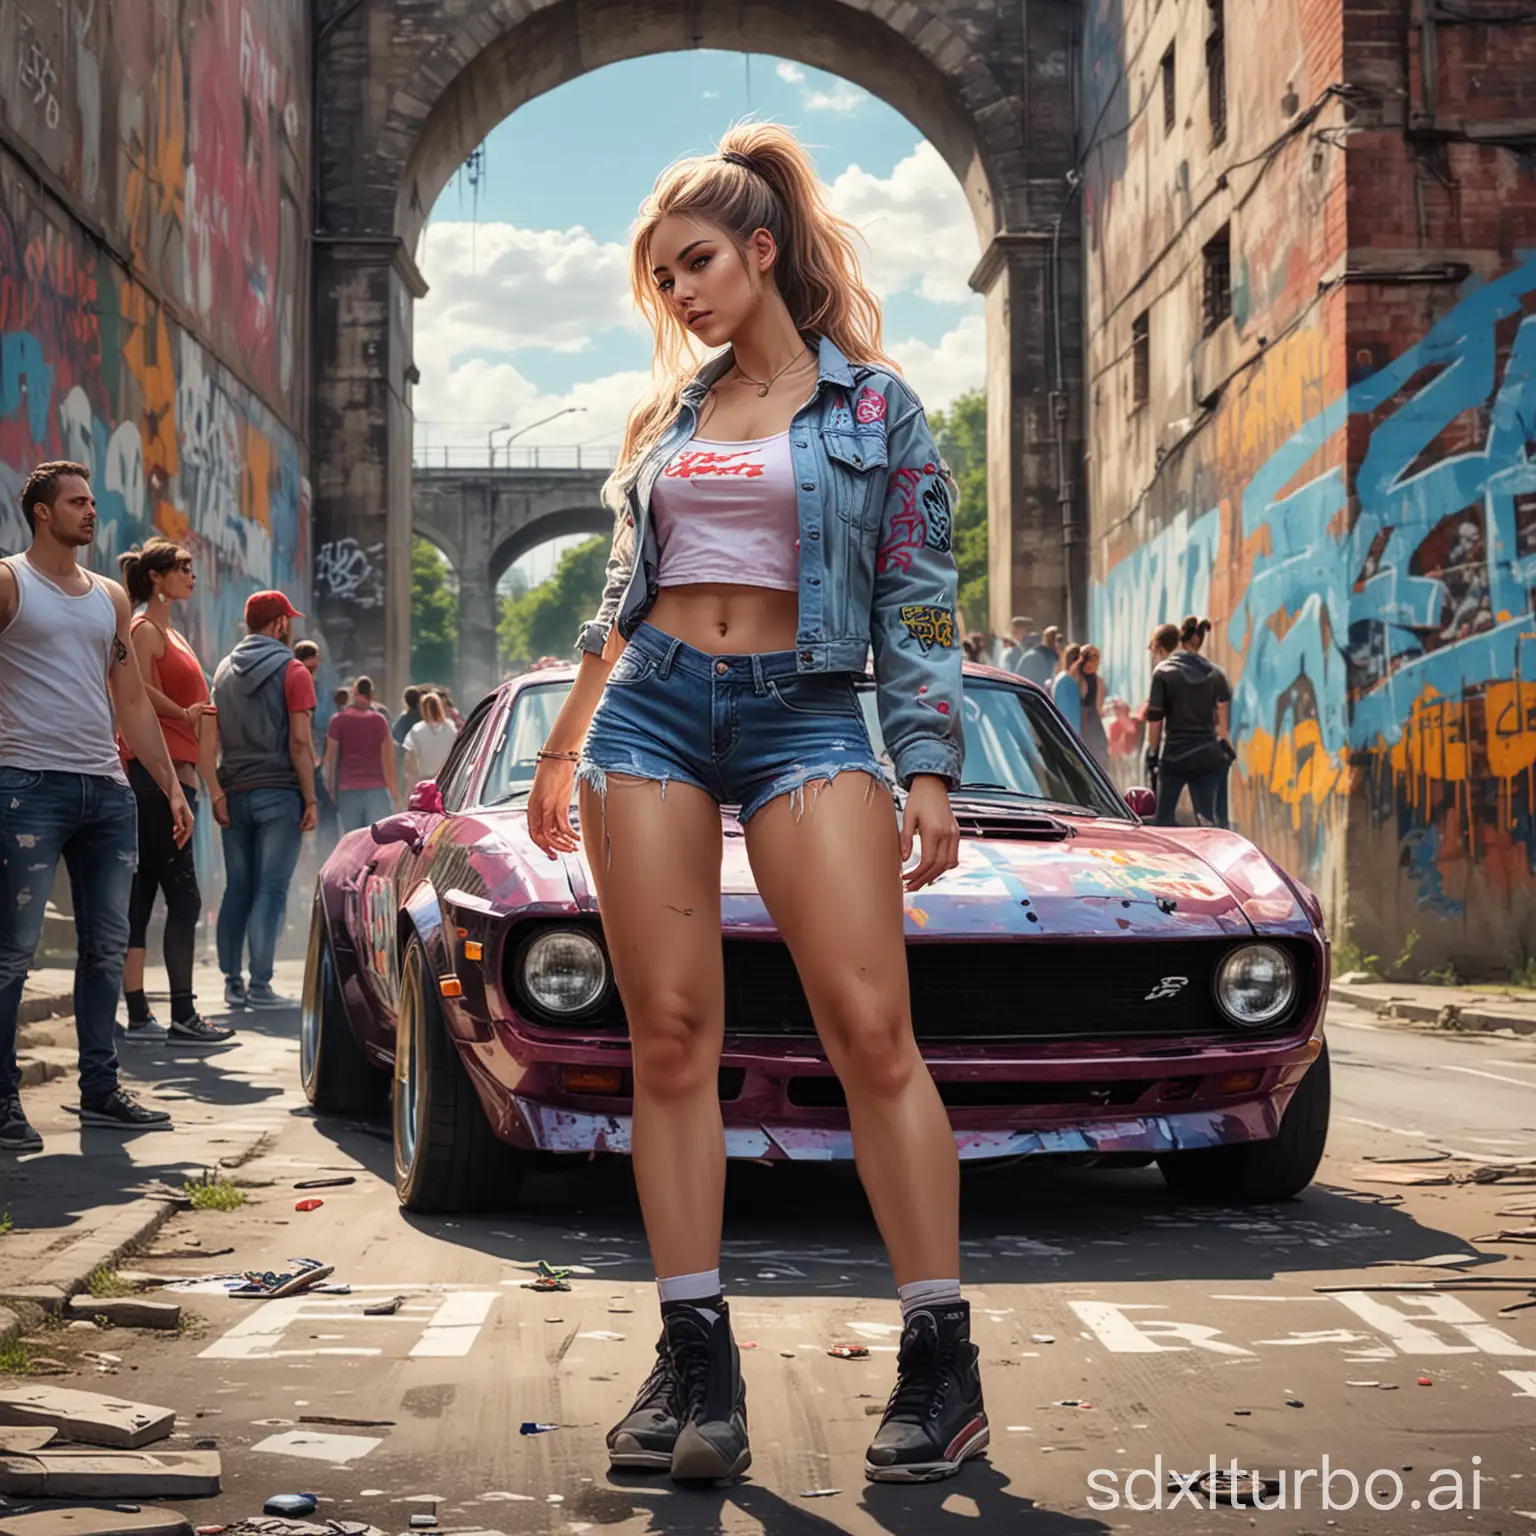 Please draw a street racer girl who gives the start to two cars in a race, stands with her back to full height, in the background are spectators a viaduct and a straight road and walls with bright graffiti